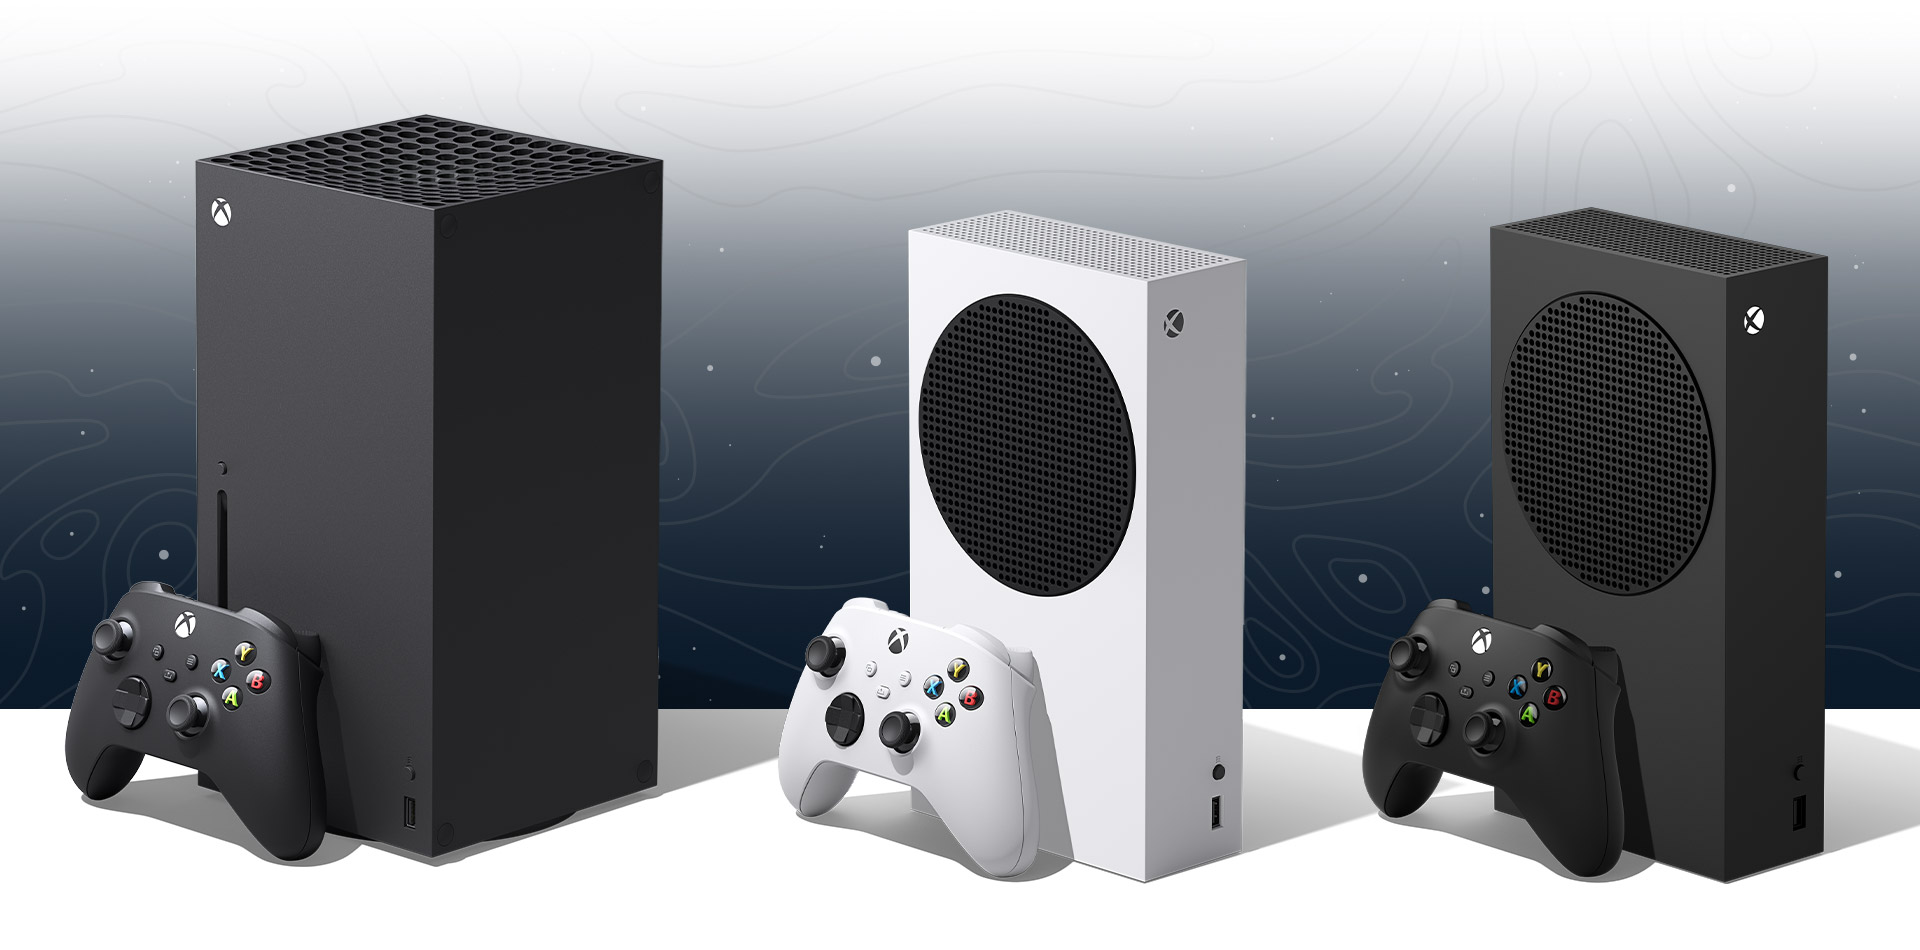 Screenshot of the Xbox Series X, Xbox Series S and Xbox Series S - 1TB with matching black and white controllers.